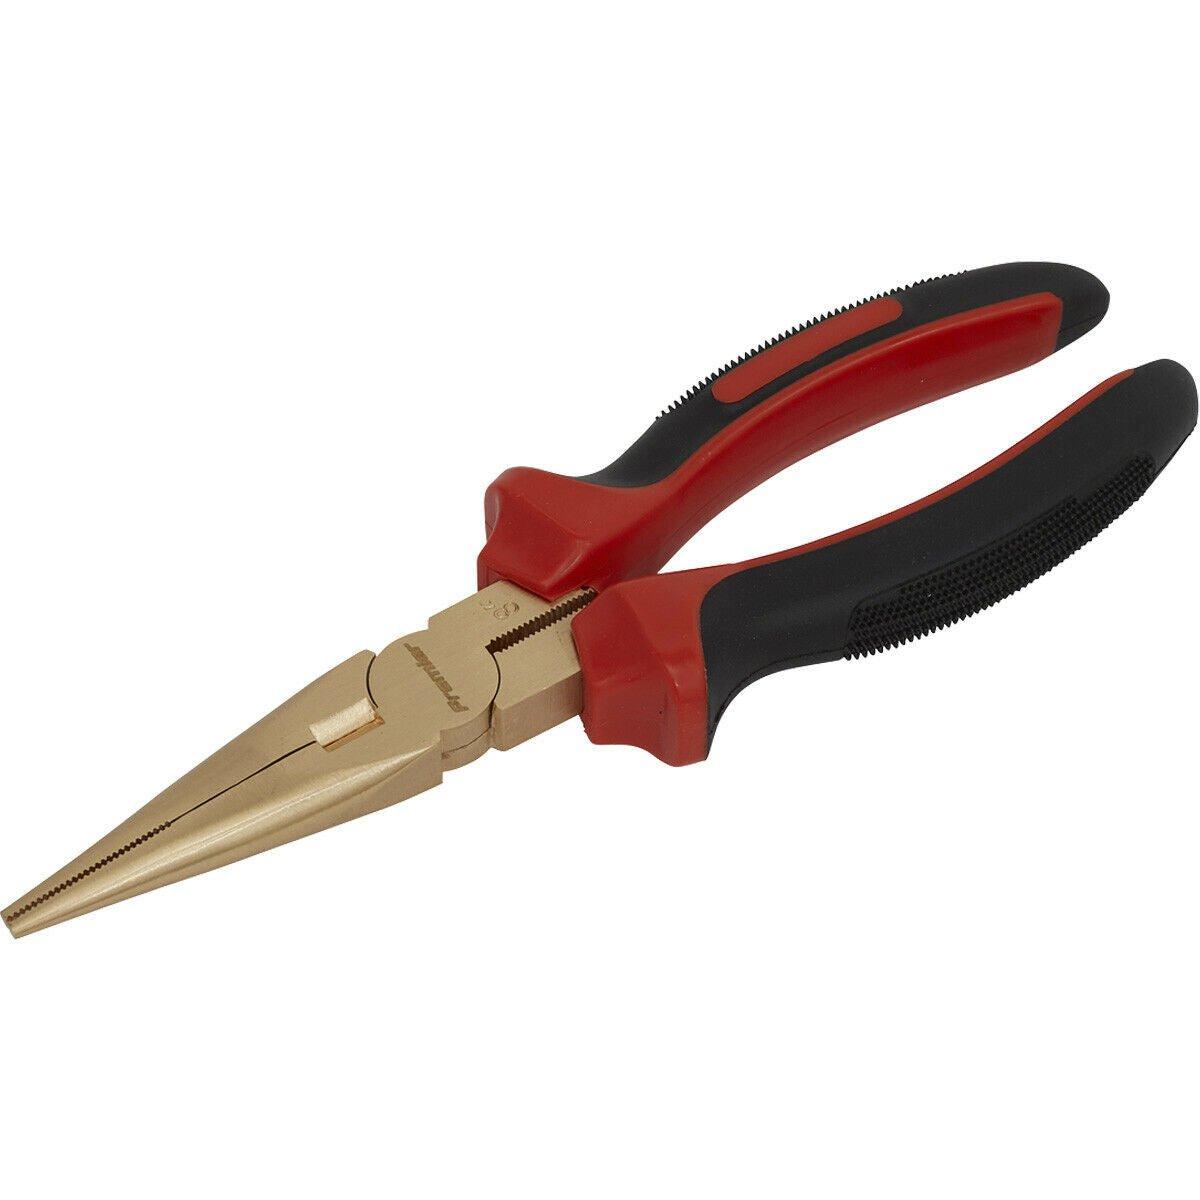 200mm Non Sparking Long Nose Pliers - Serrated Jaws - Beryllium Copper